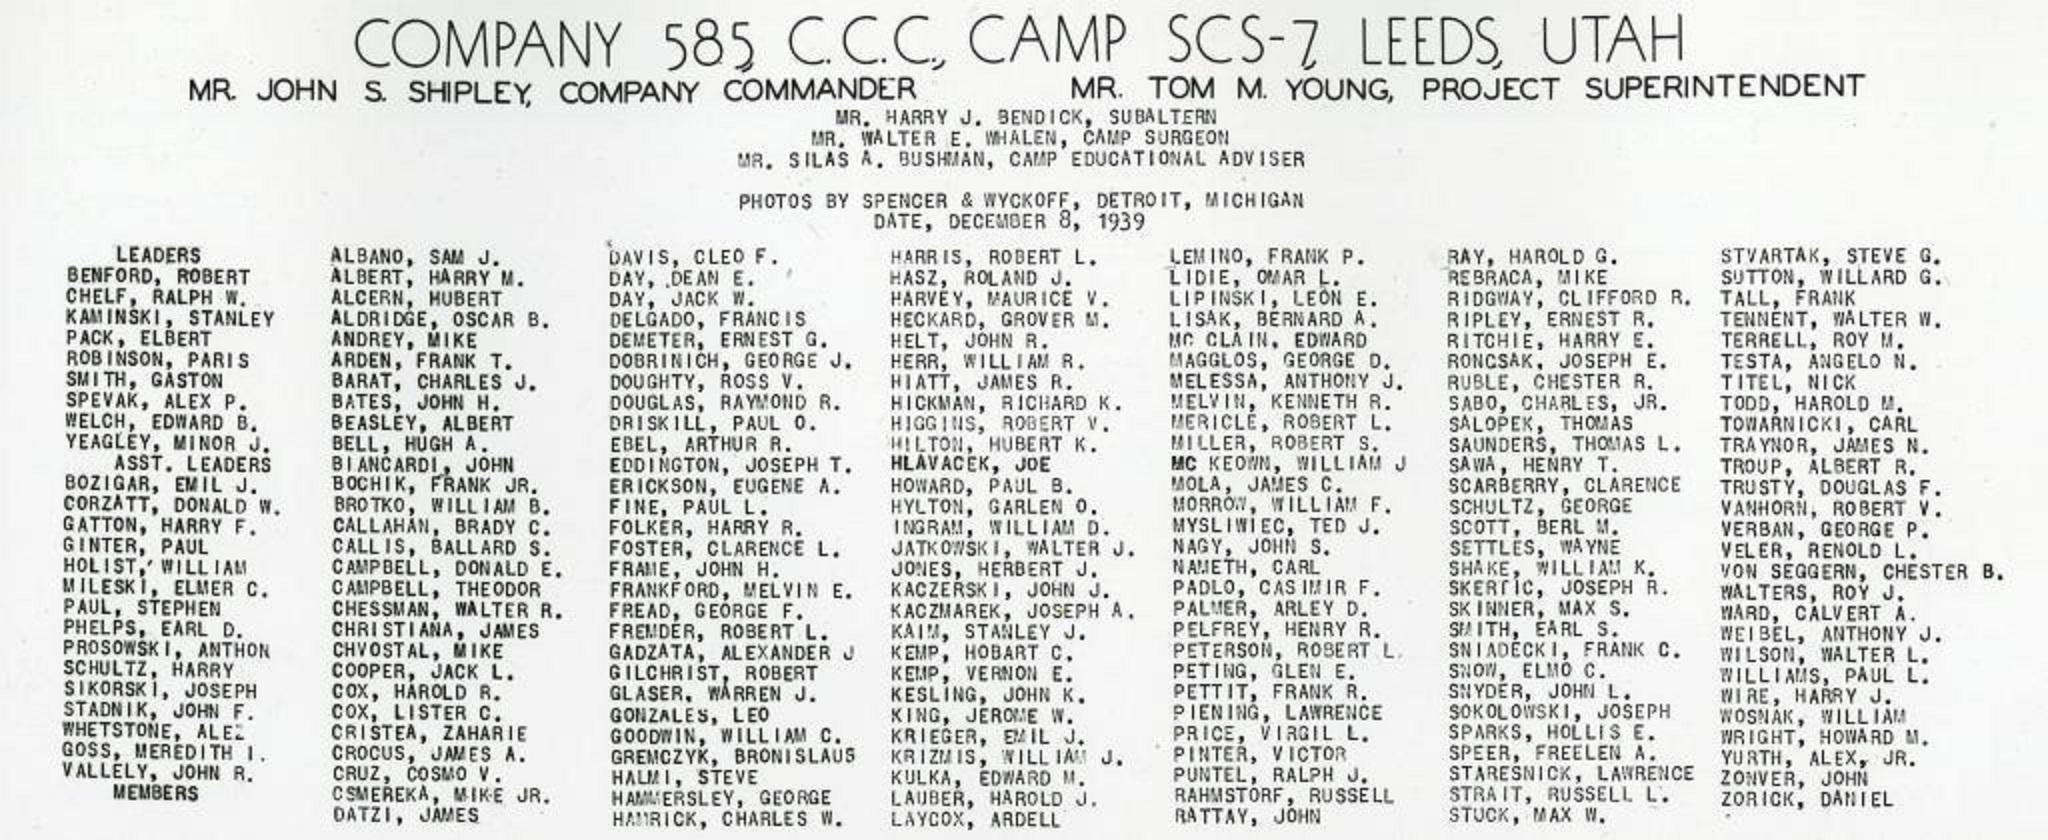 WCHS-01039 List of the Leeds CCC Camp Personnel